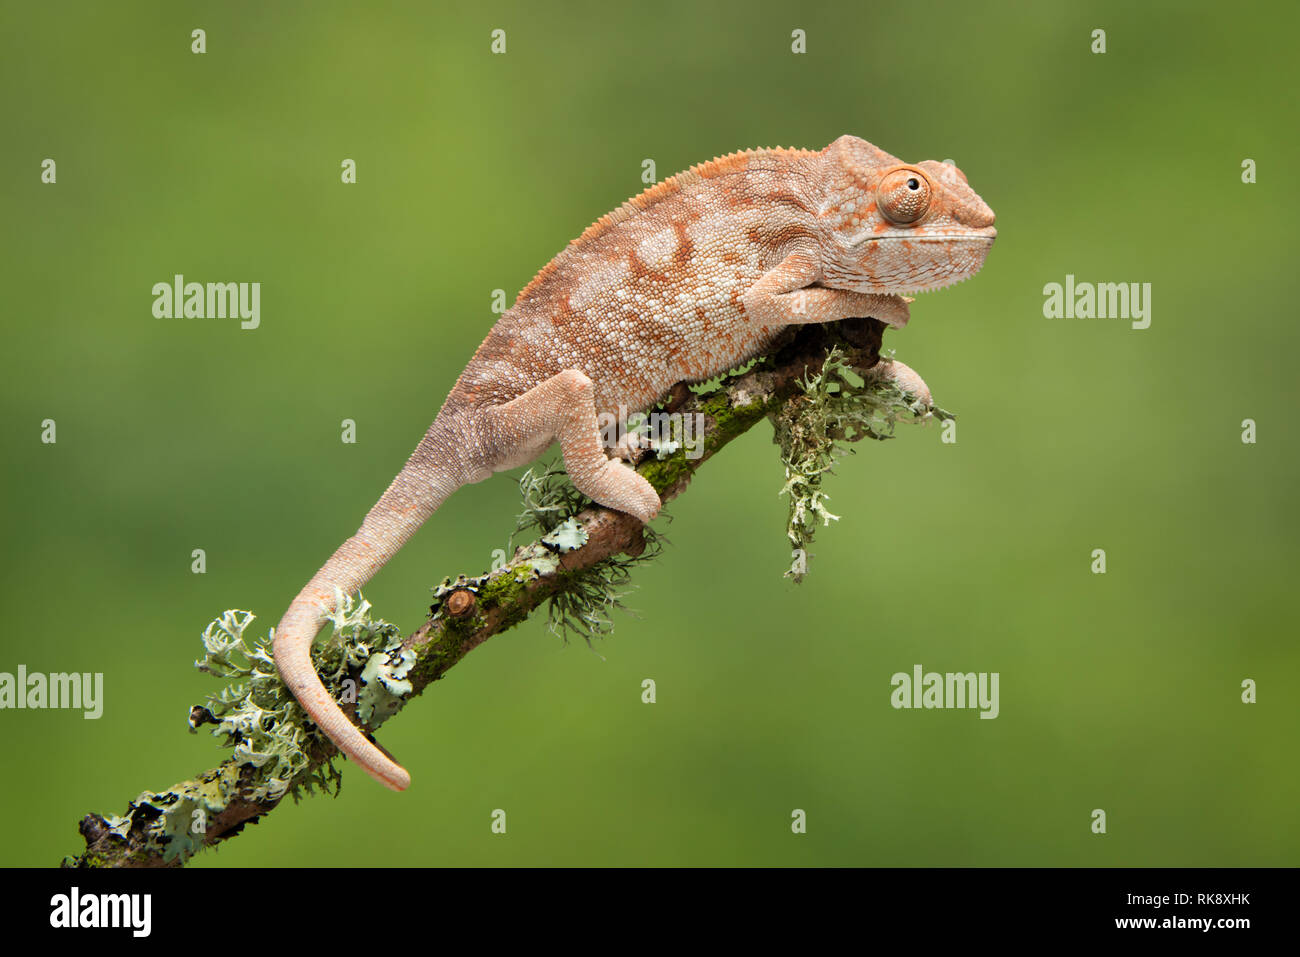 A full length portrait of a chameleon climbing up a branch with a plain green background. Its tail wrapped around the branch Stock Photo